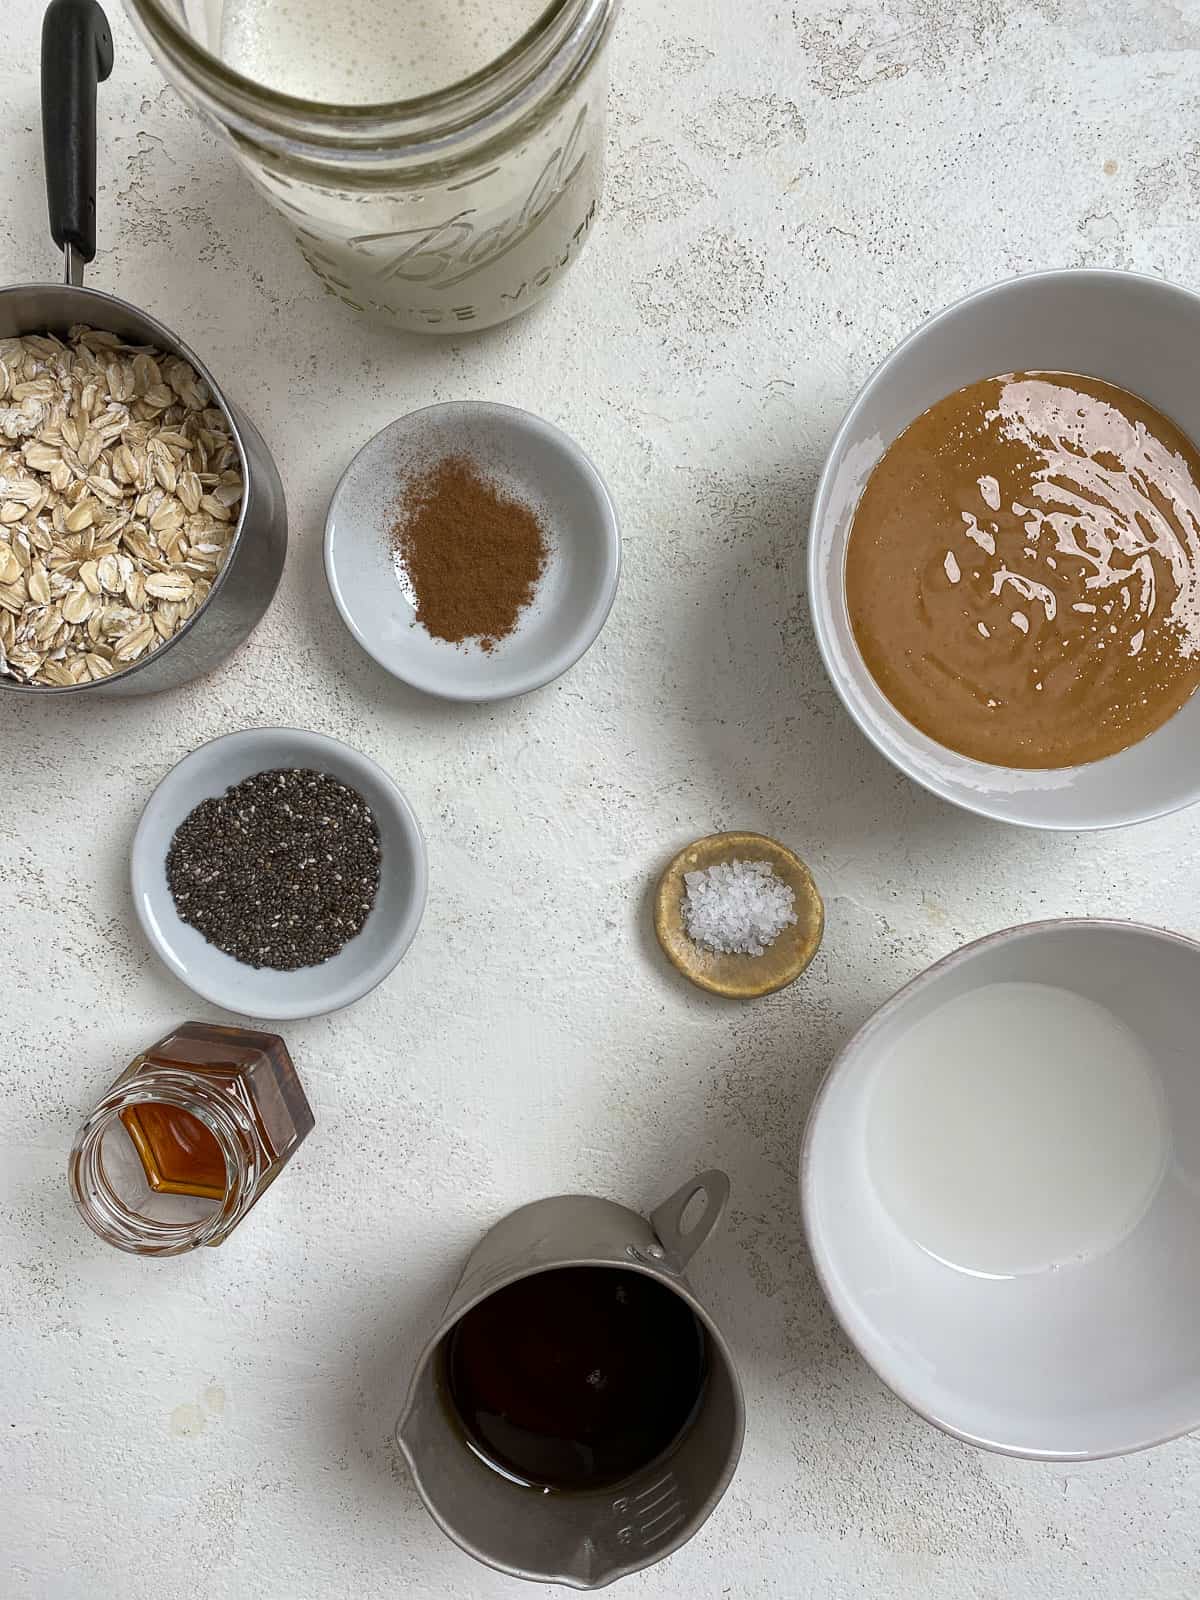 ingredients for Salted Caramel Overnight Oats measured out against a white background